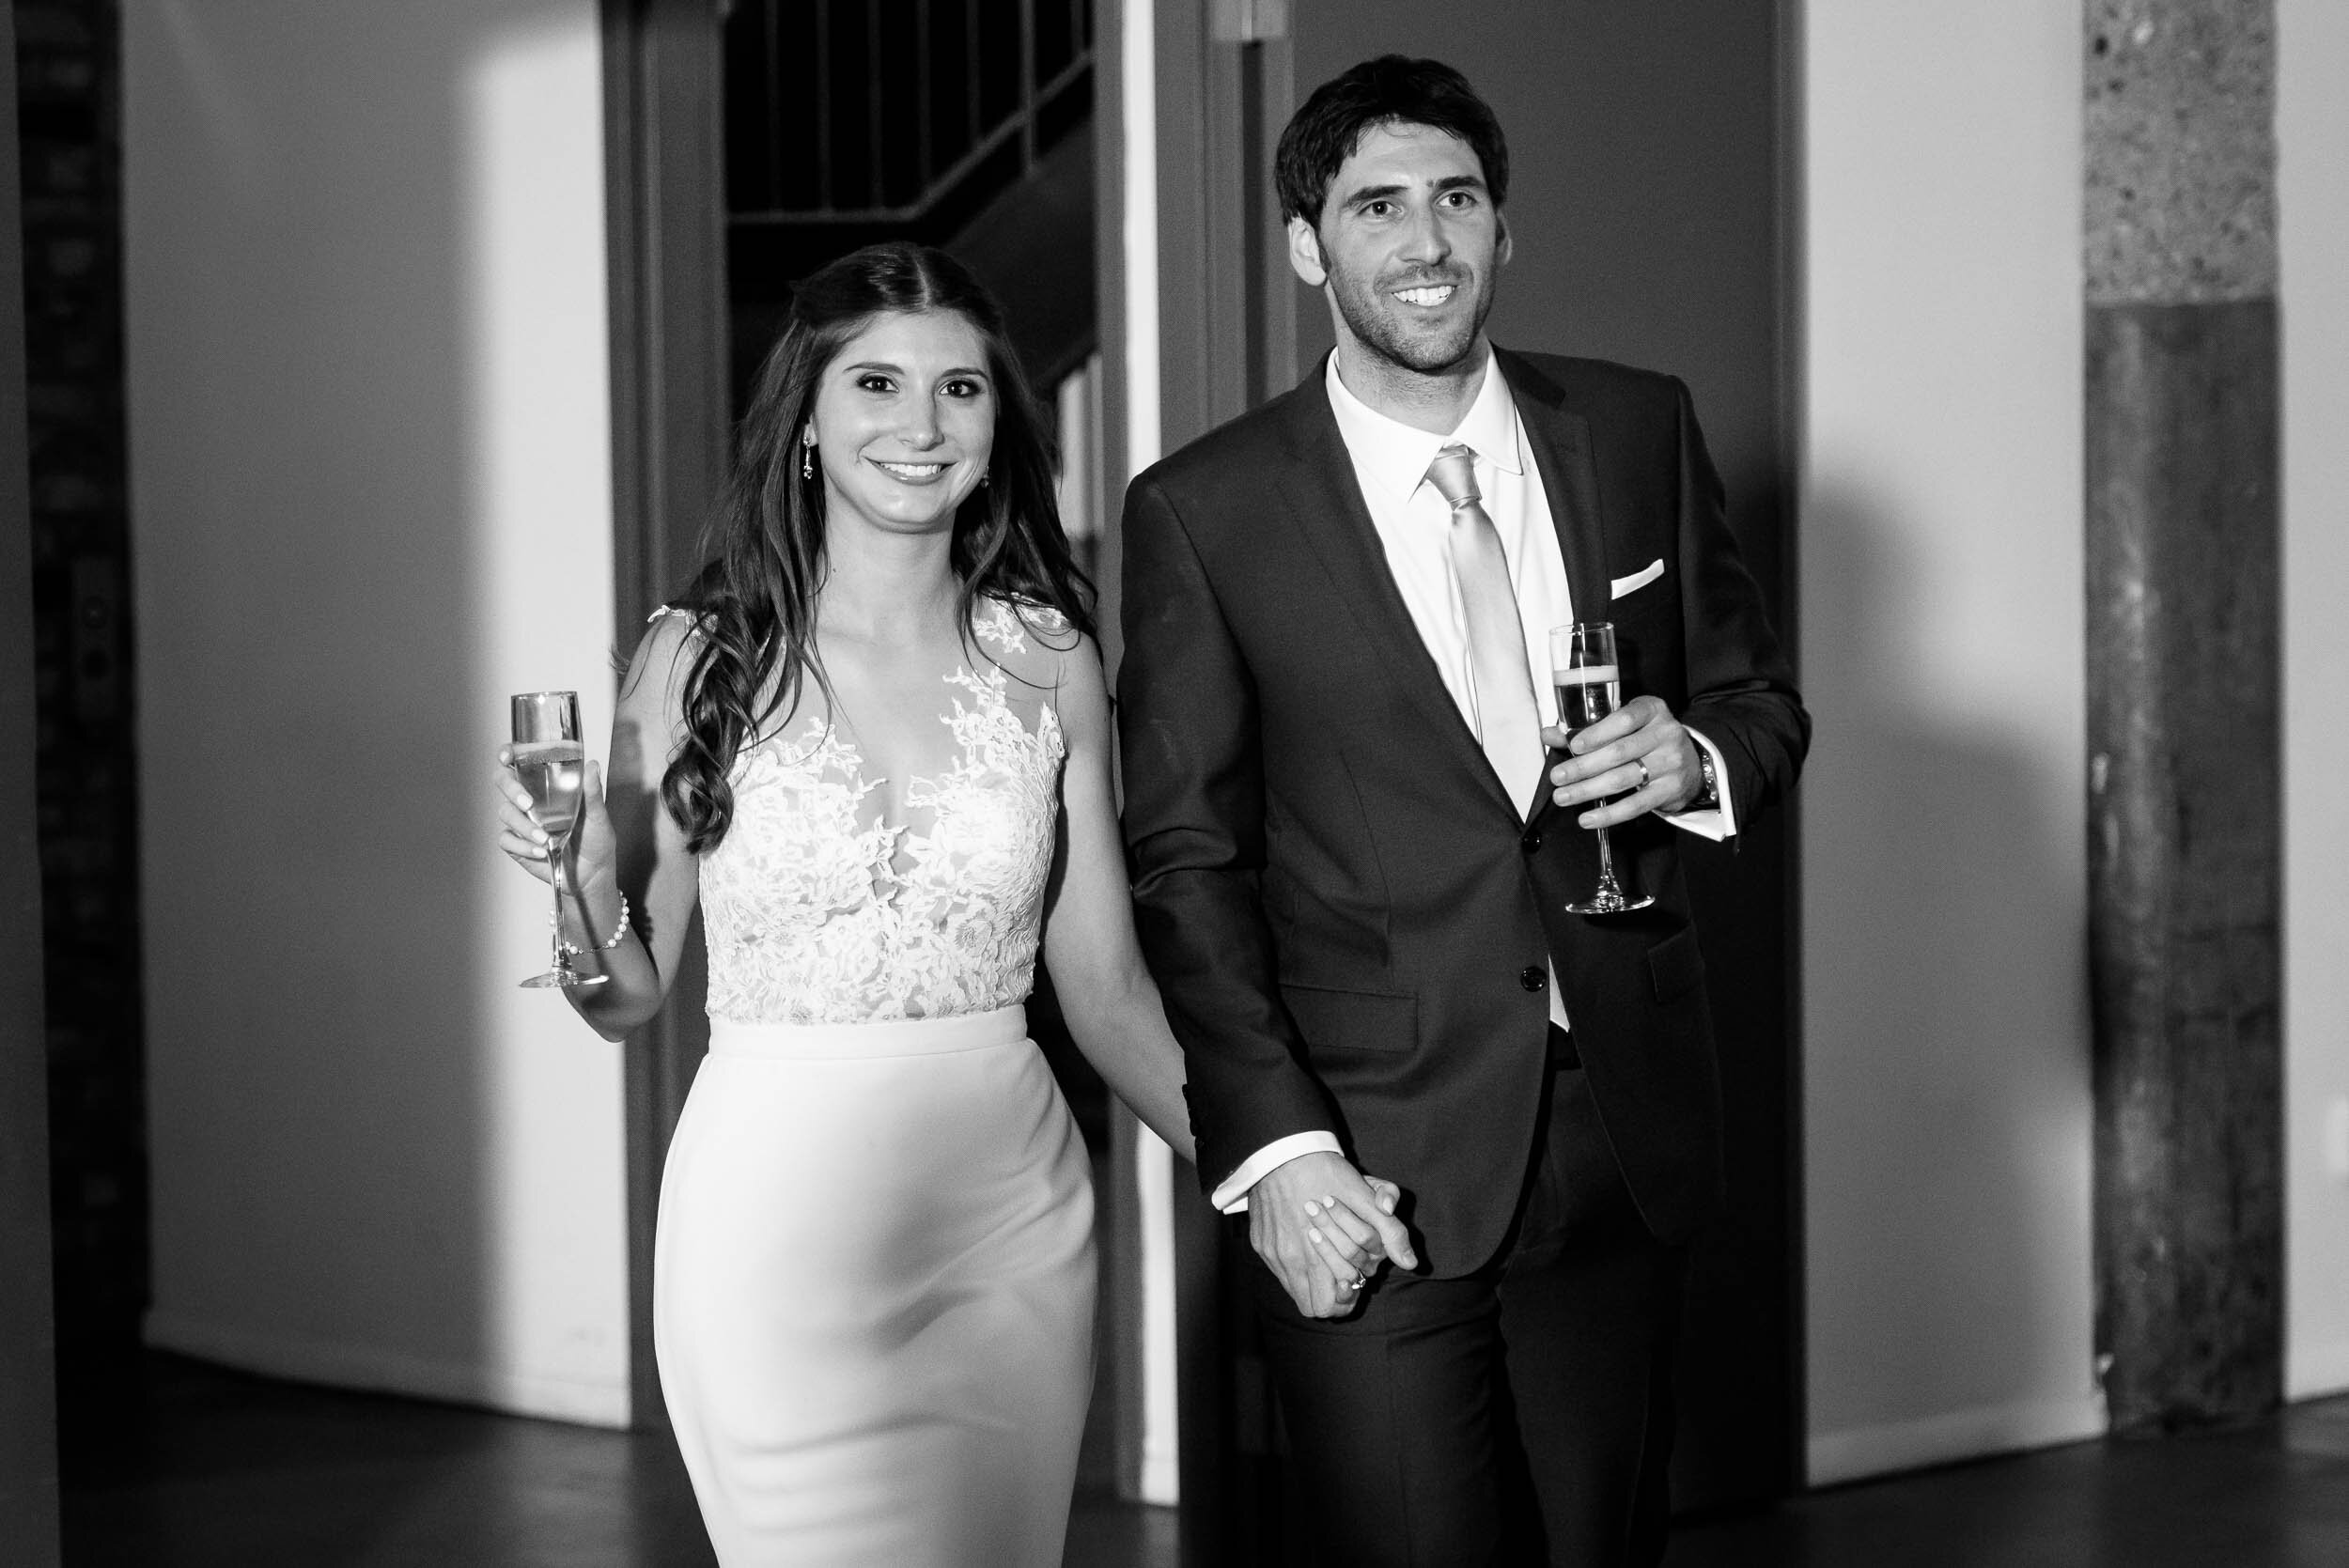 Bride and groom introduced into the reception: Ravenswood Event Center Chicago wedding captured by J. Brown Photography.  